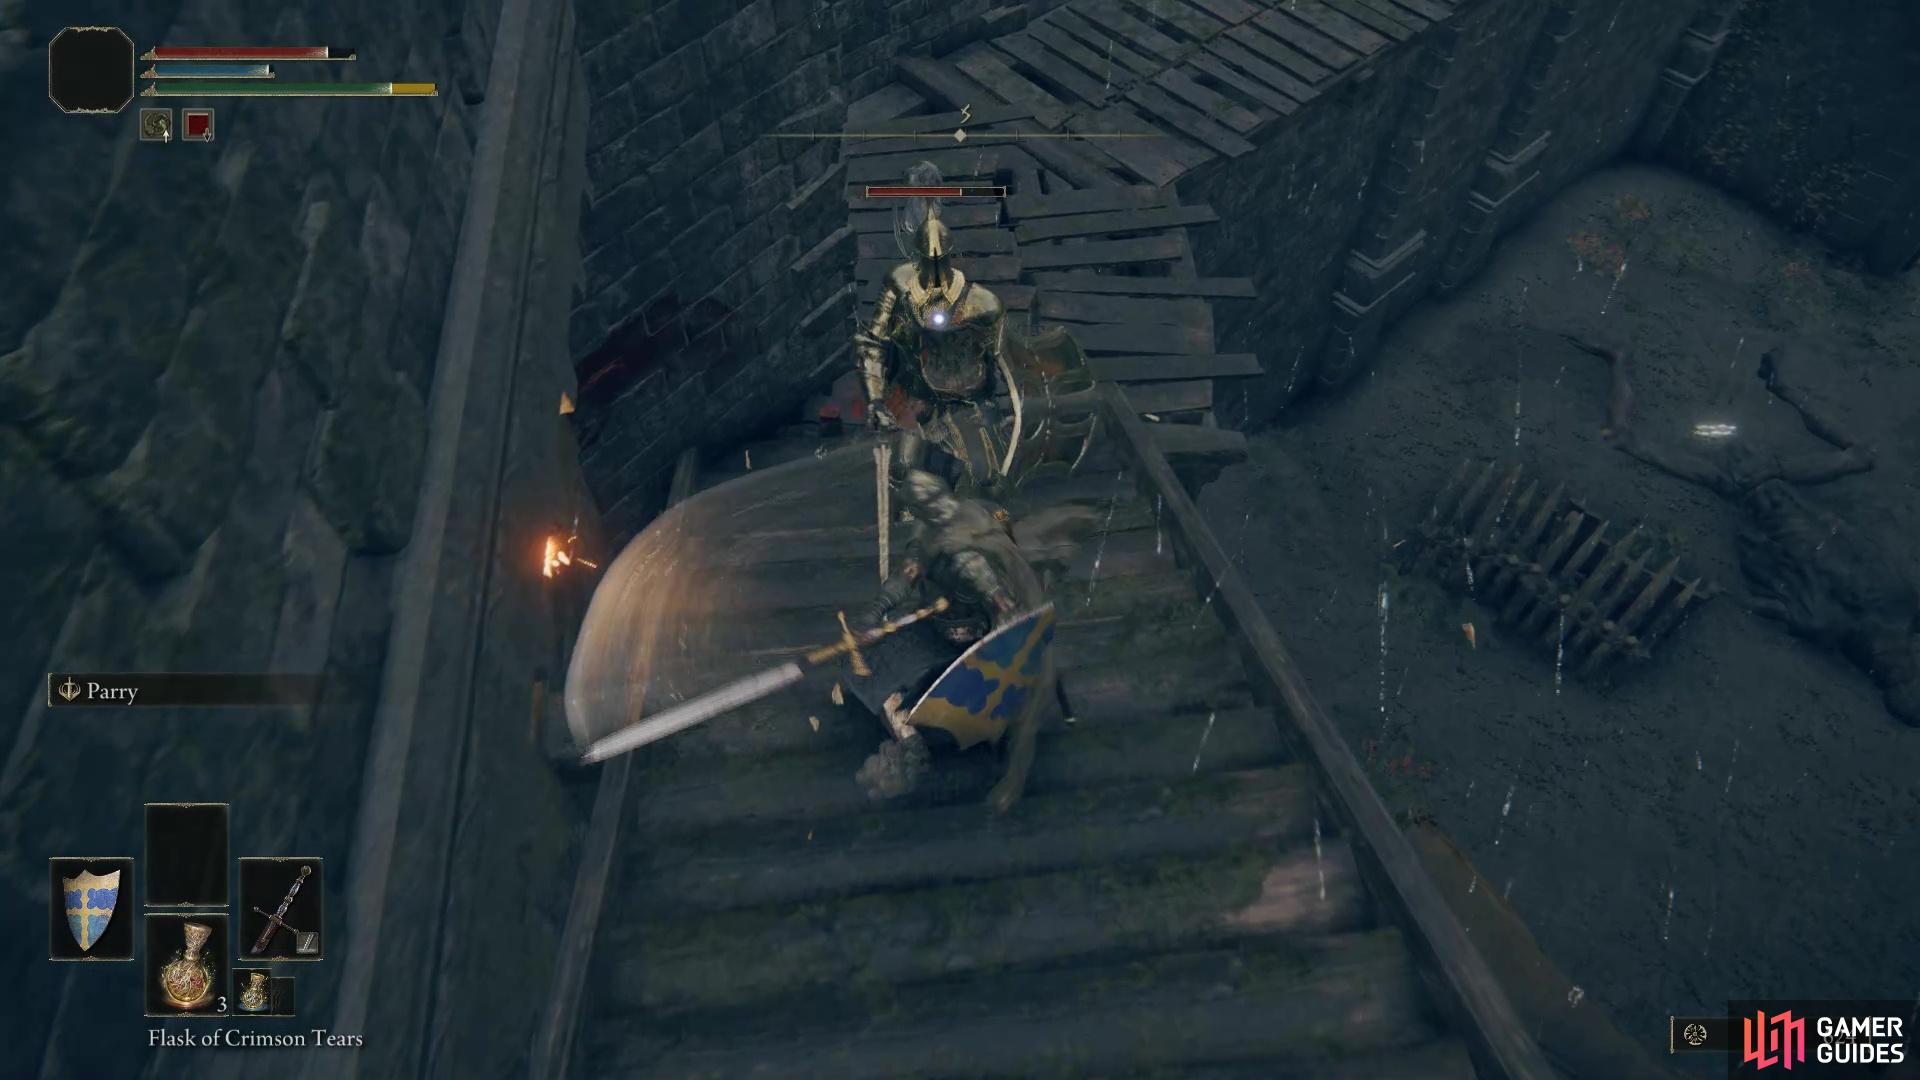 The Golden Knight is the mini boss of the fort